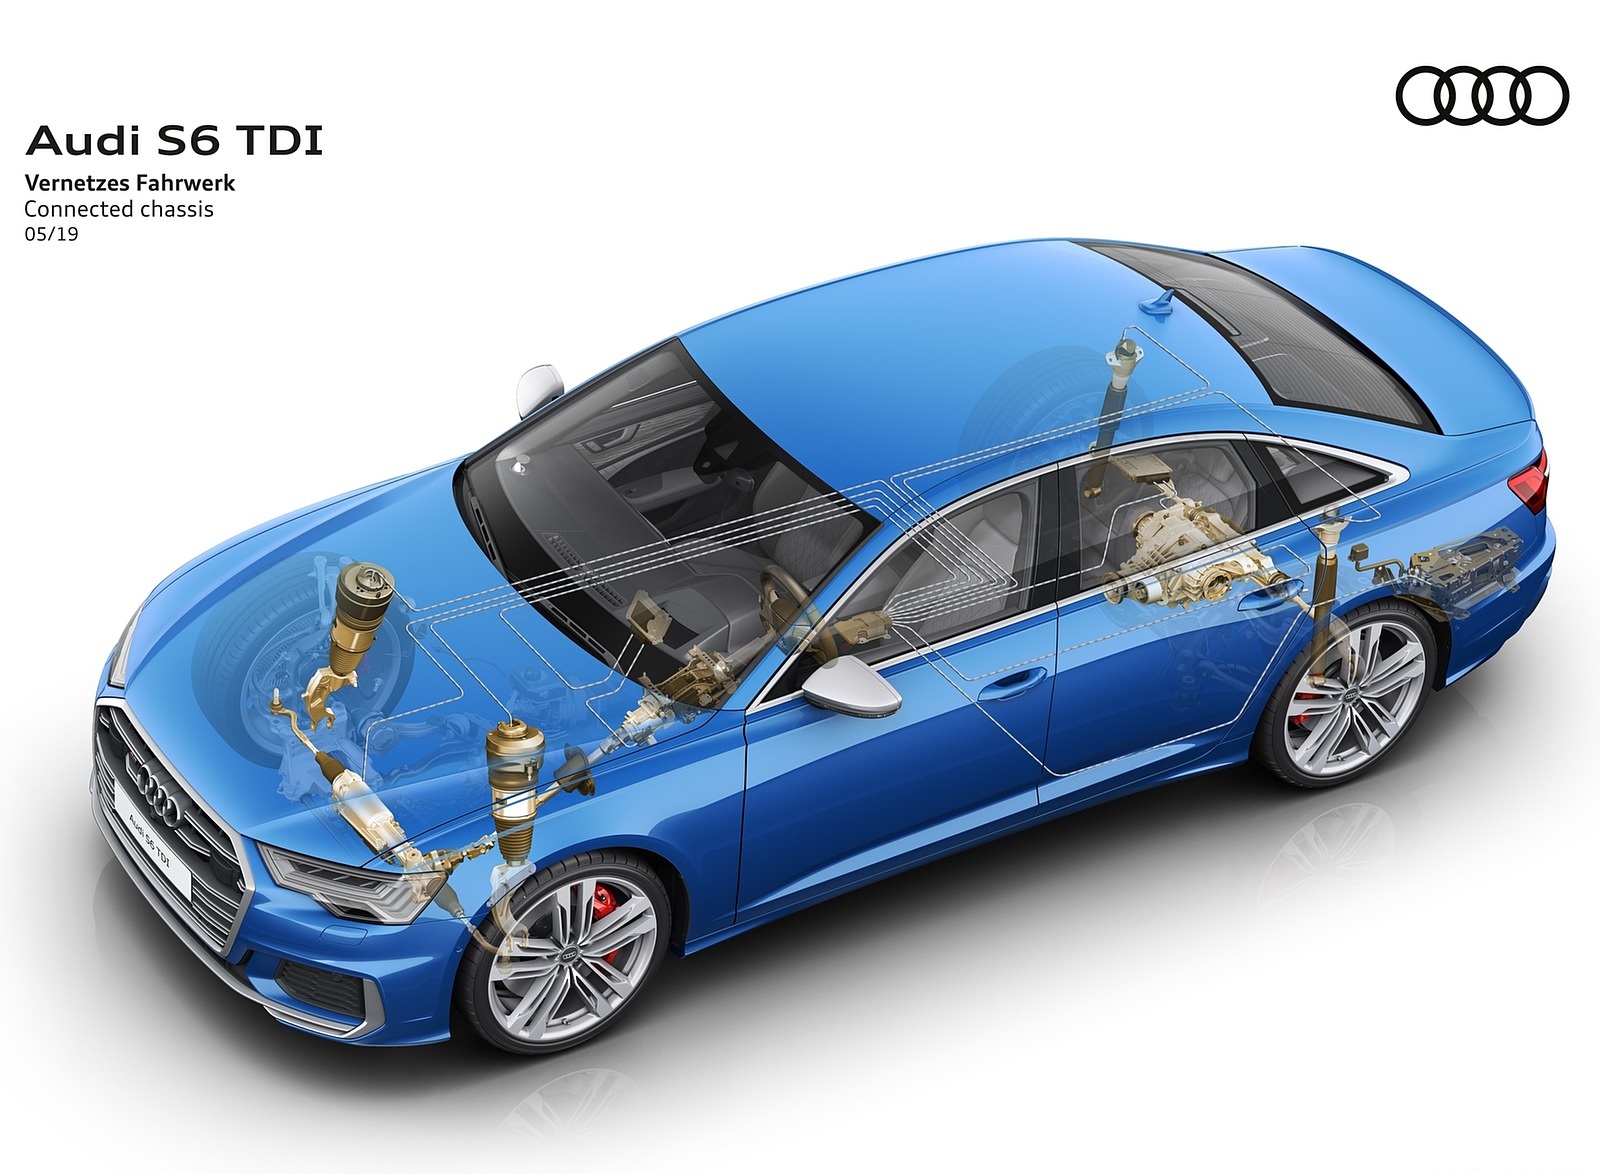 2020 Audi S6 Sedan TDI Connected Chassis Wallpapers #53 of 68